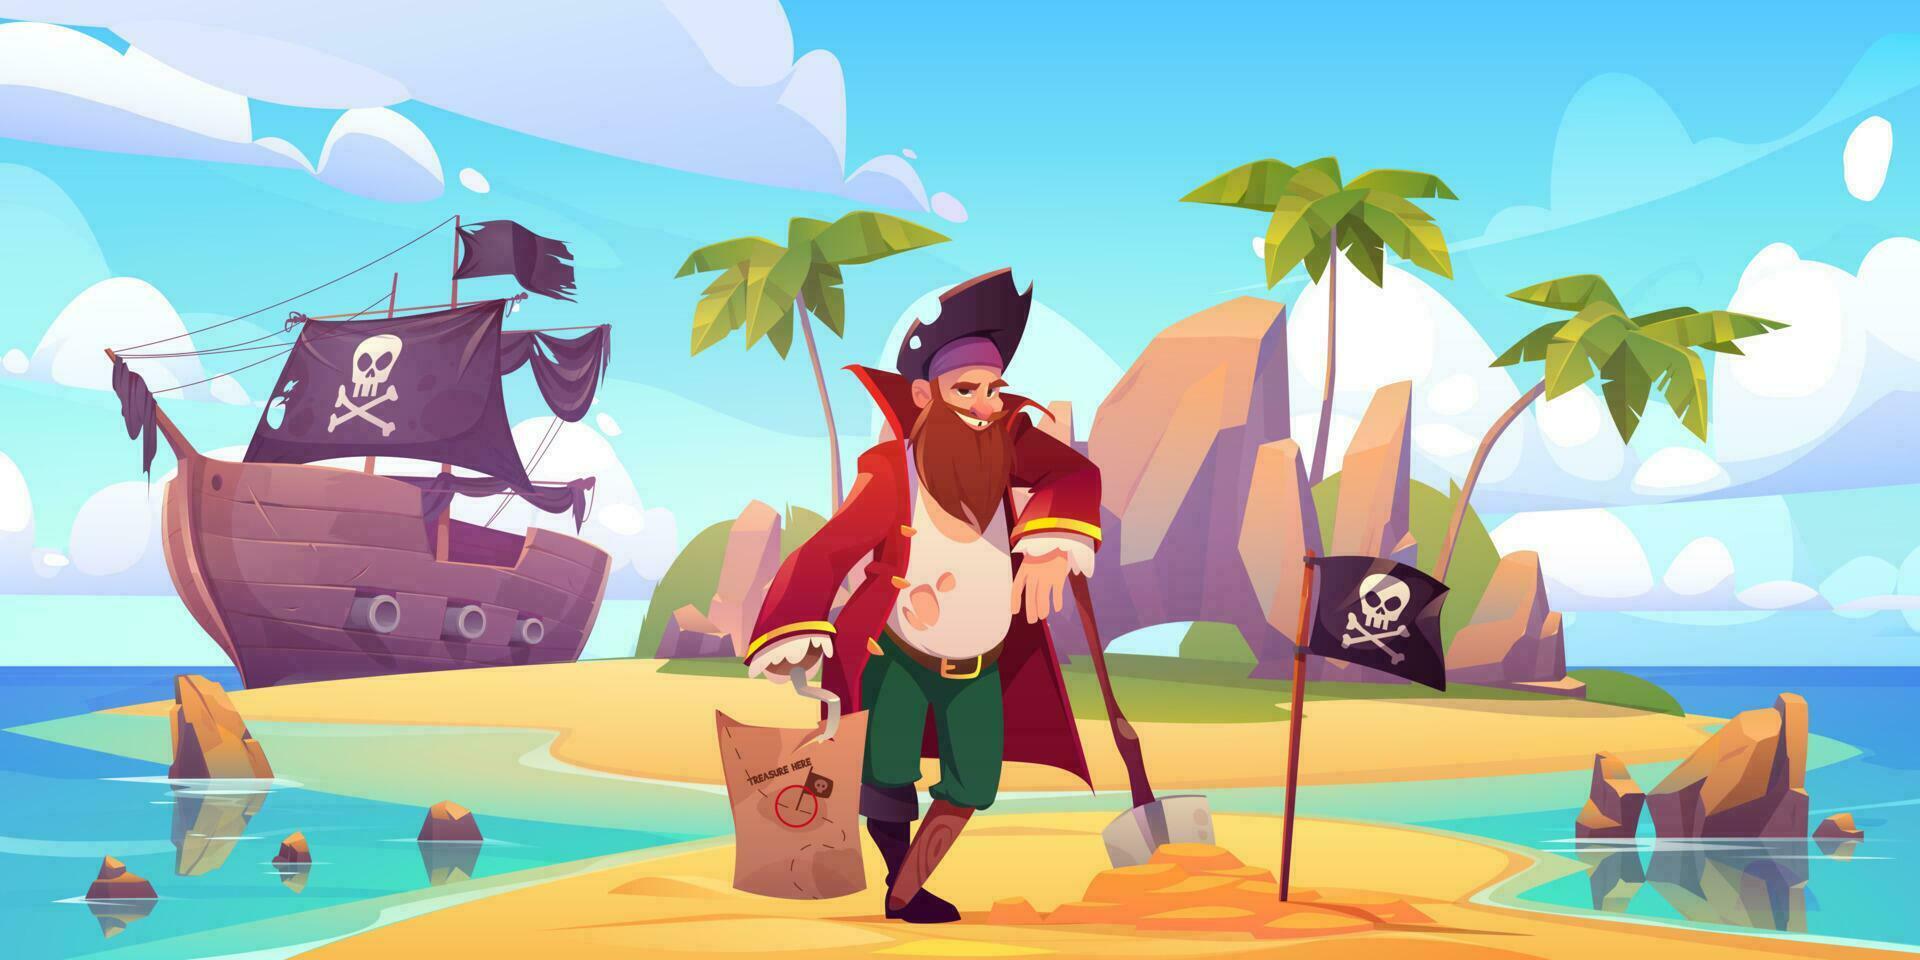 Pirate buried treasure chest on tropical island vector